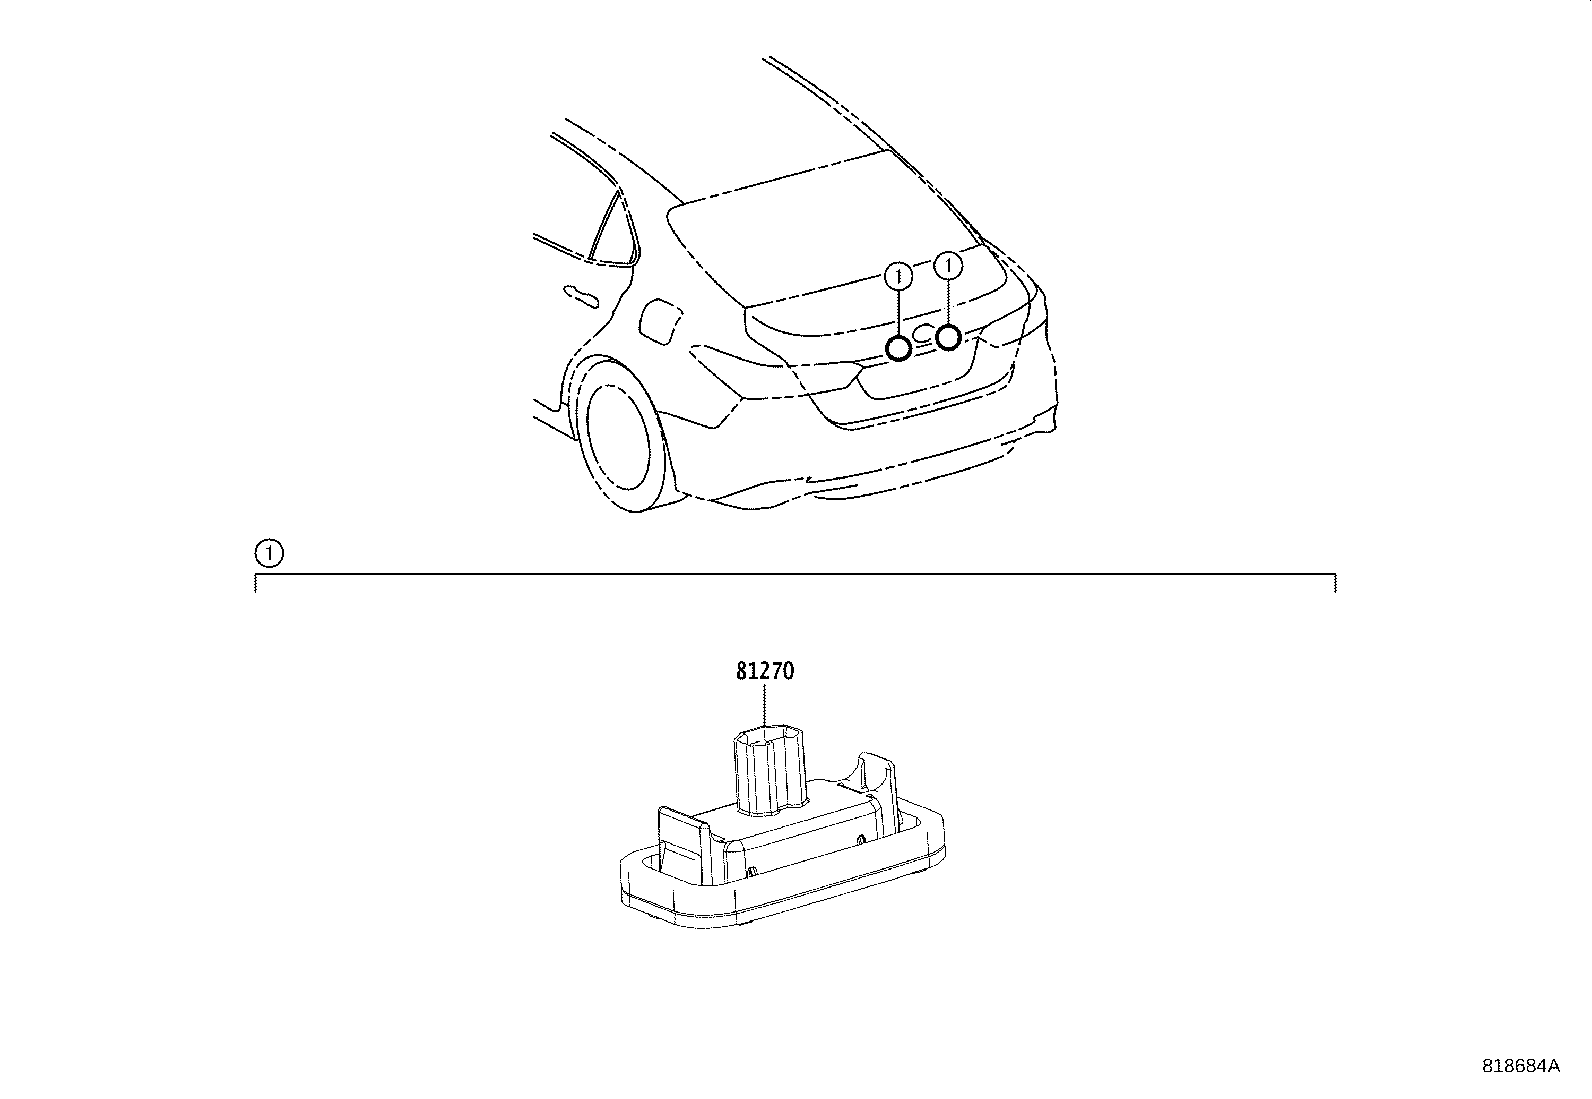 8113:REAR LICENSE PLATE LAMP CAMRY